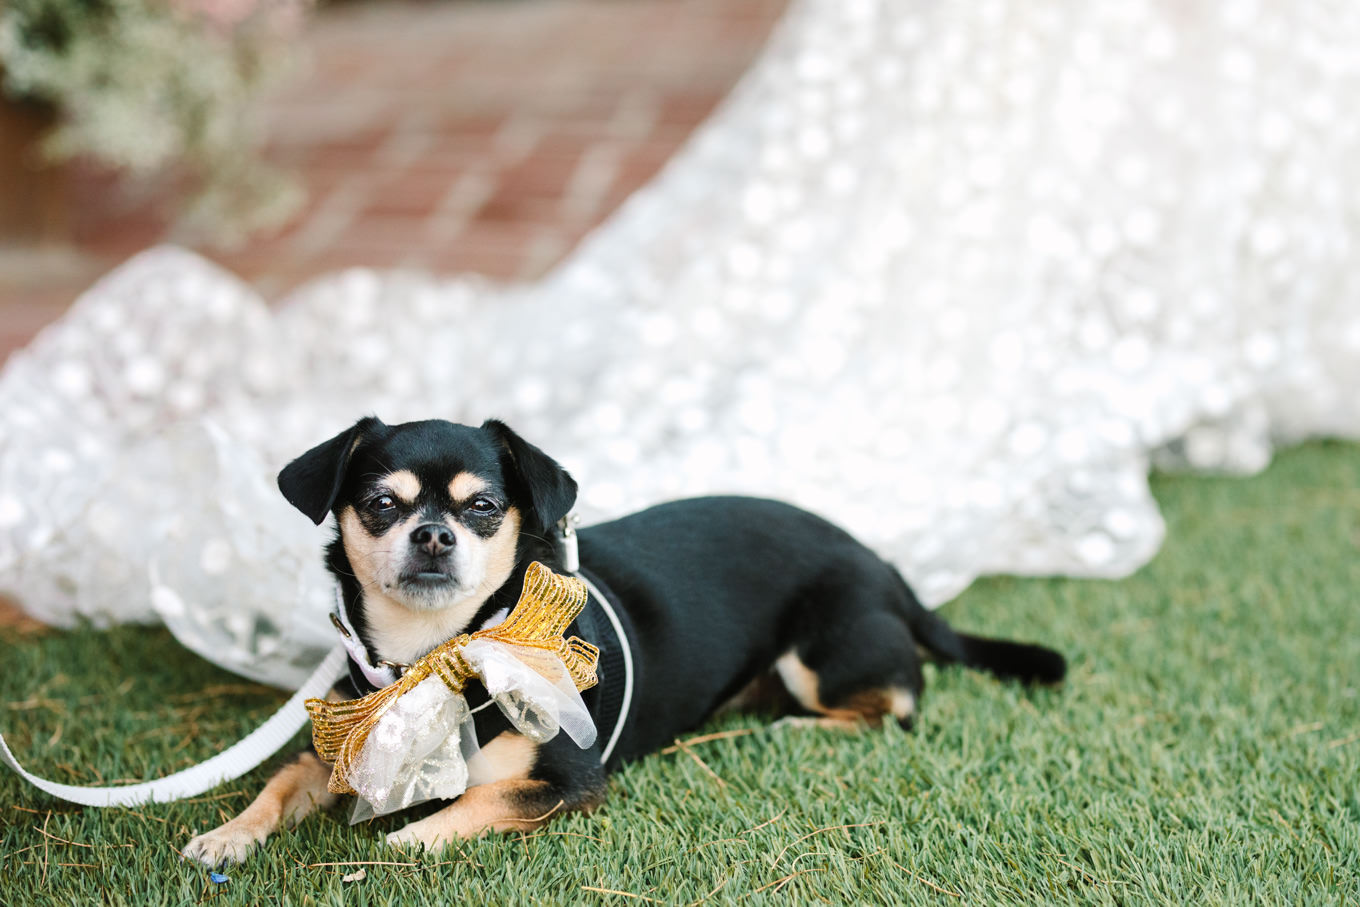 Dog resting on wedding dress during ceremony | Colorful pop-up micro wedding at The Ruby Street Los Angeles featured on Green Wedding Shoes | Colorful and elevated photography for fun-loving couples in Southern California | #colorfulwedding #popupwedding #weddingphotography #microwedding Source: Mary Costa Photography | Los Angeles